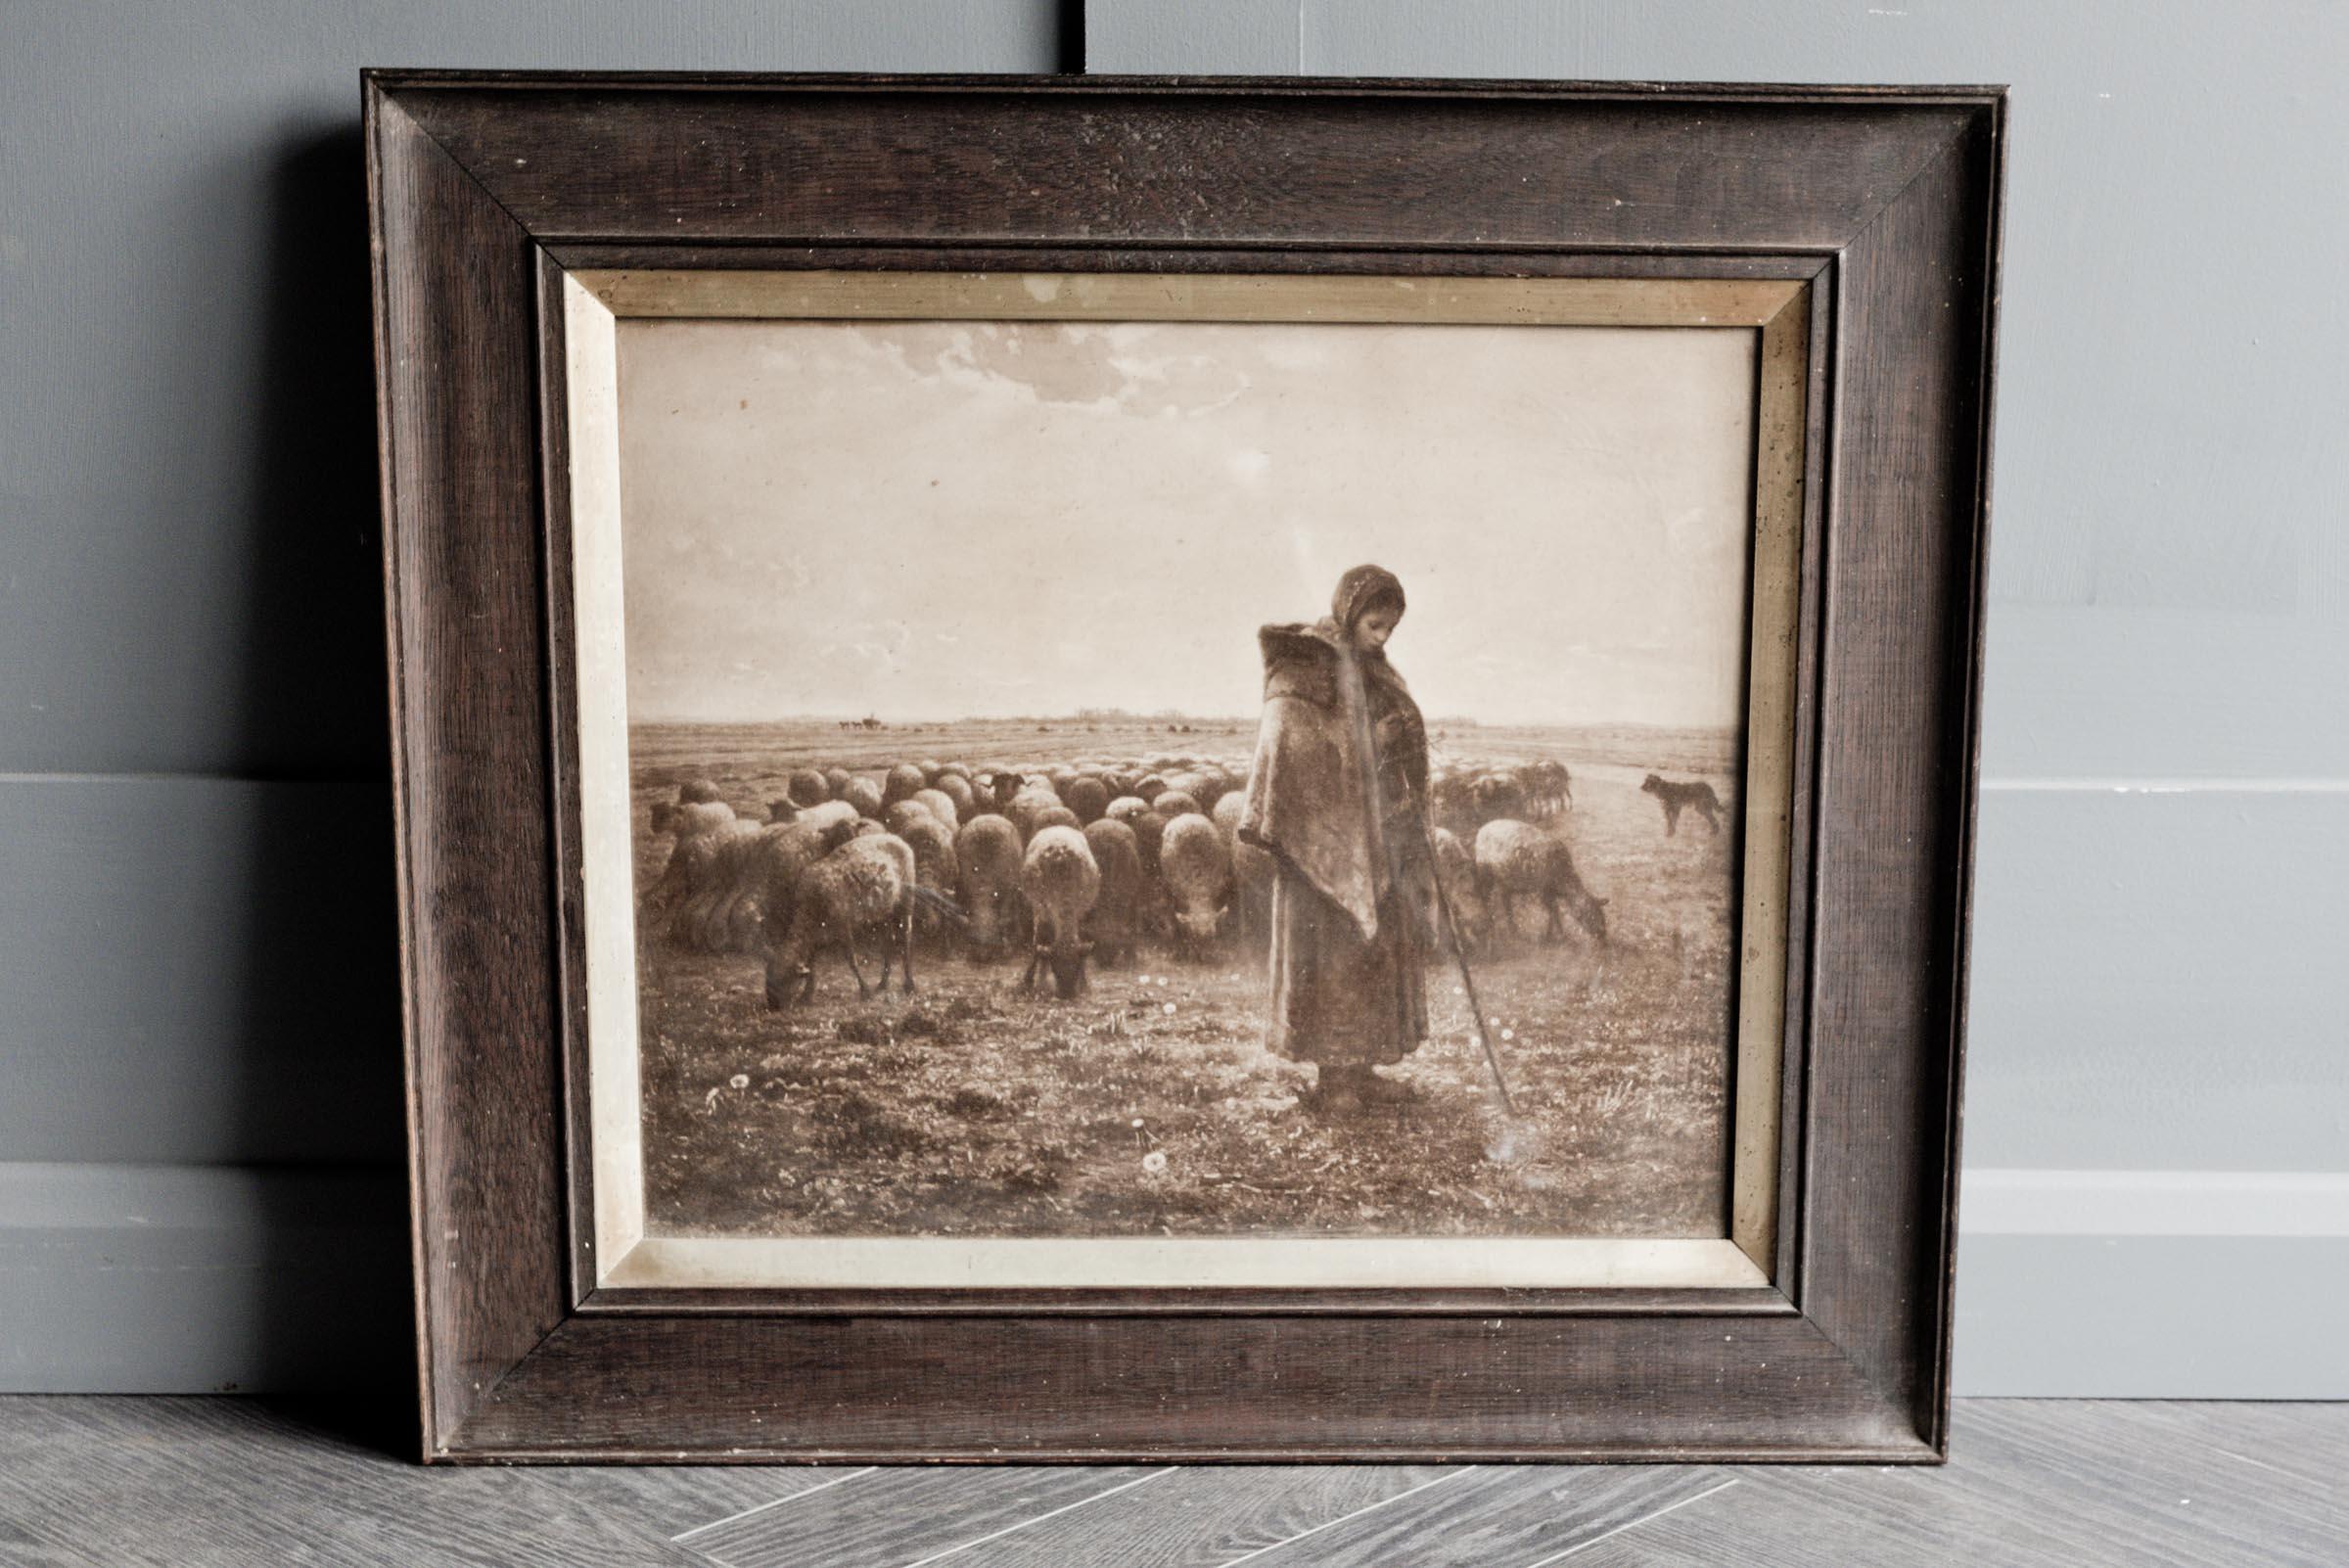 Framed victorian print of workers in field.